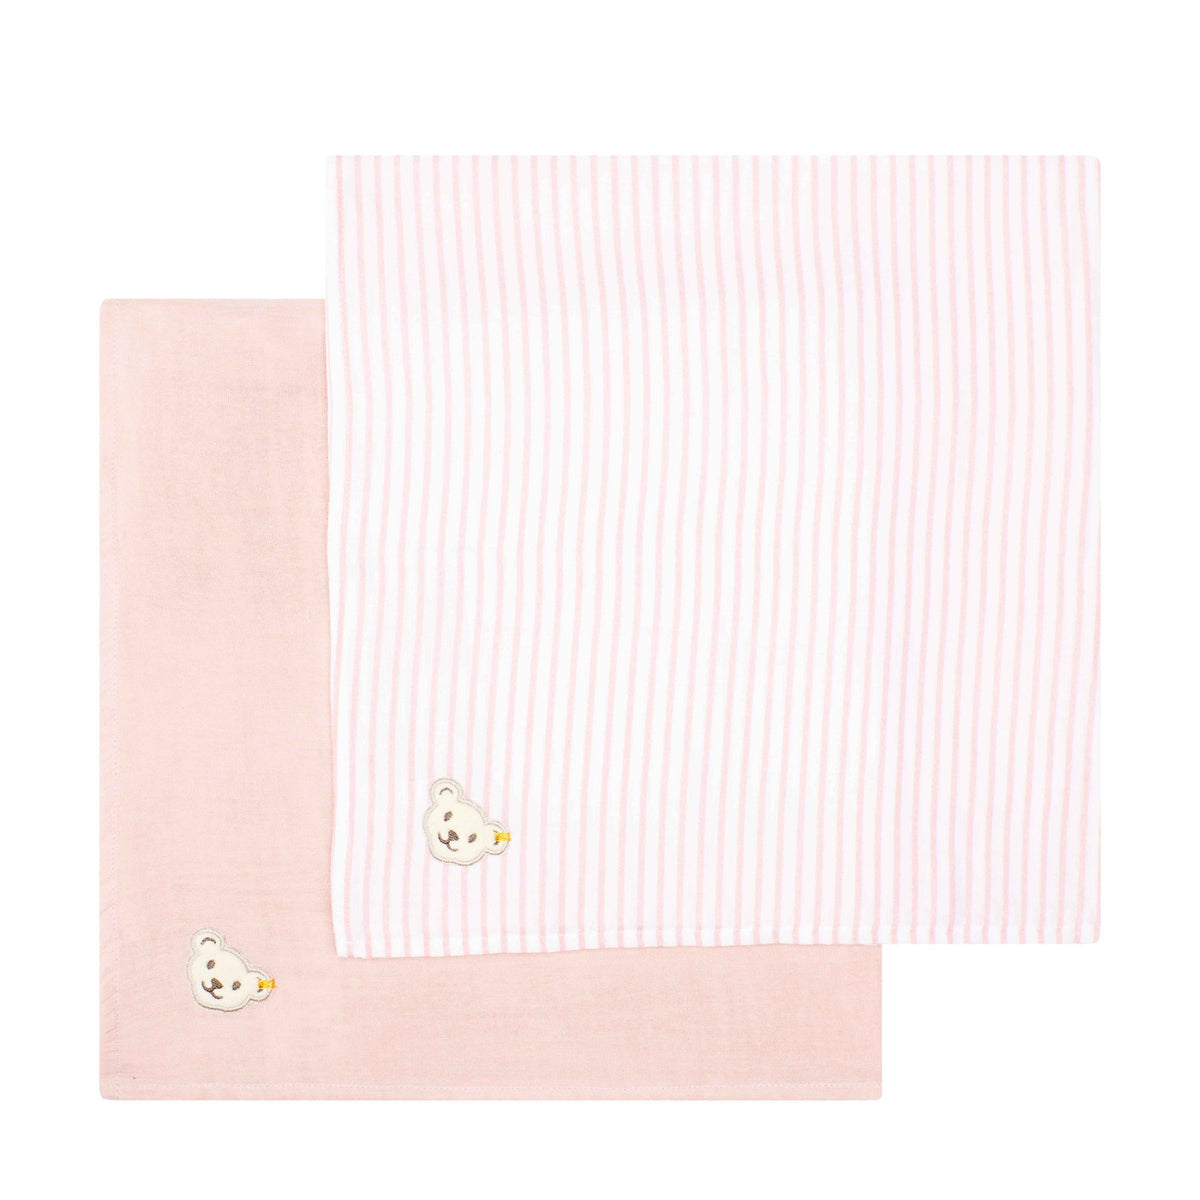 Baby Mullwindel Napkin Pack 2 L000030052 3015 Silver Pink